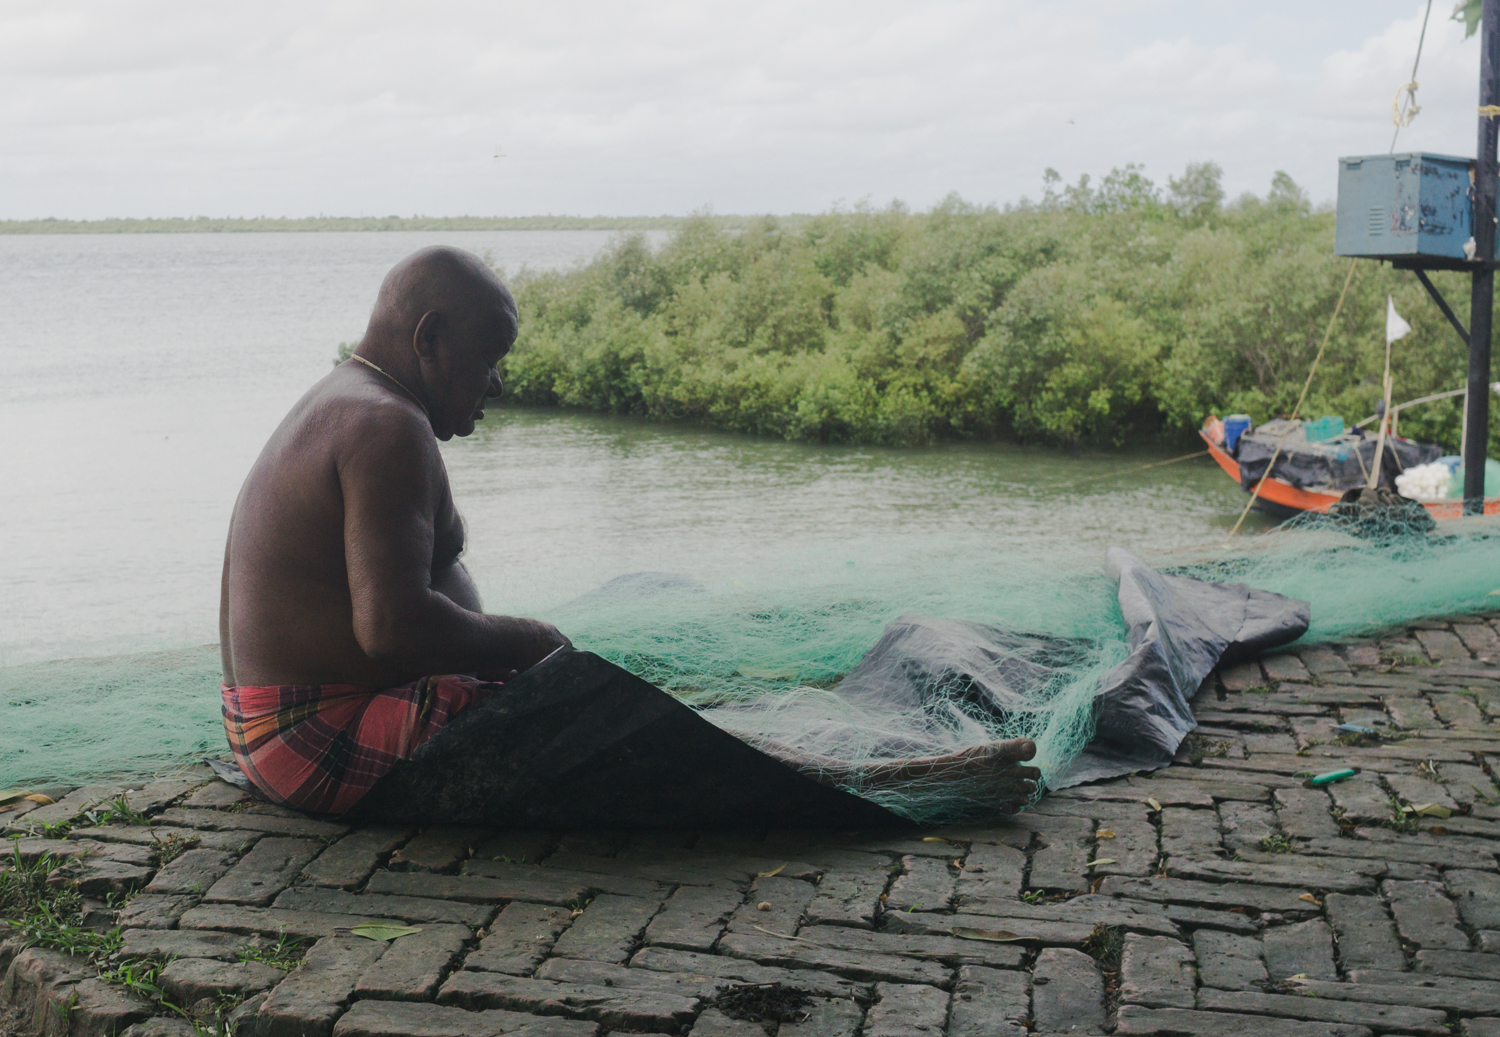 A fisherman mends his net on the bank of river                        
Thakuran.